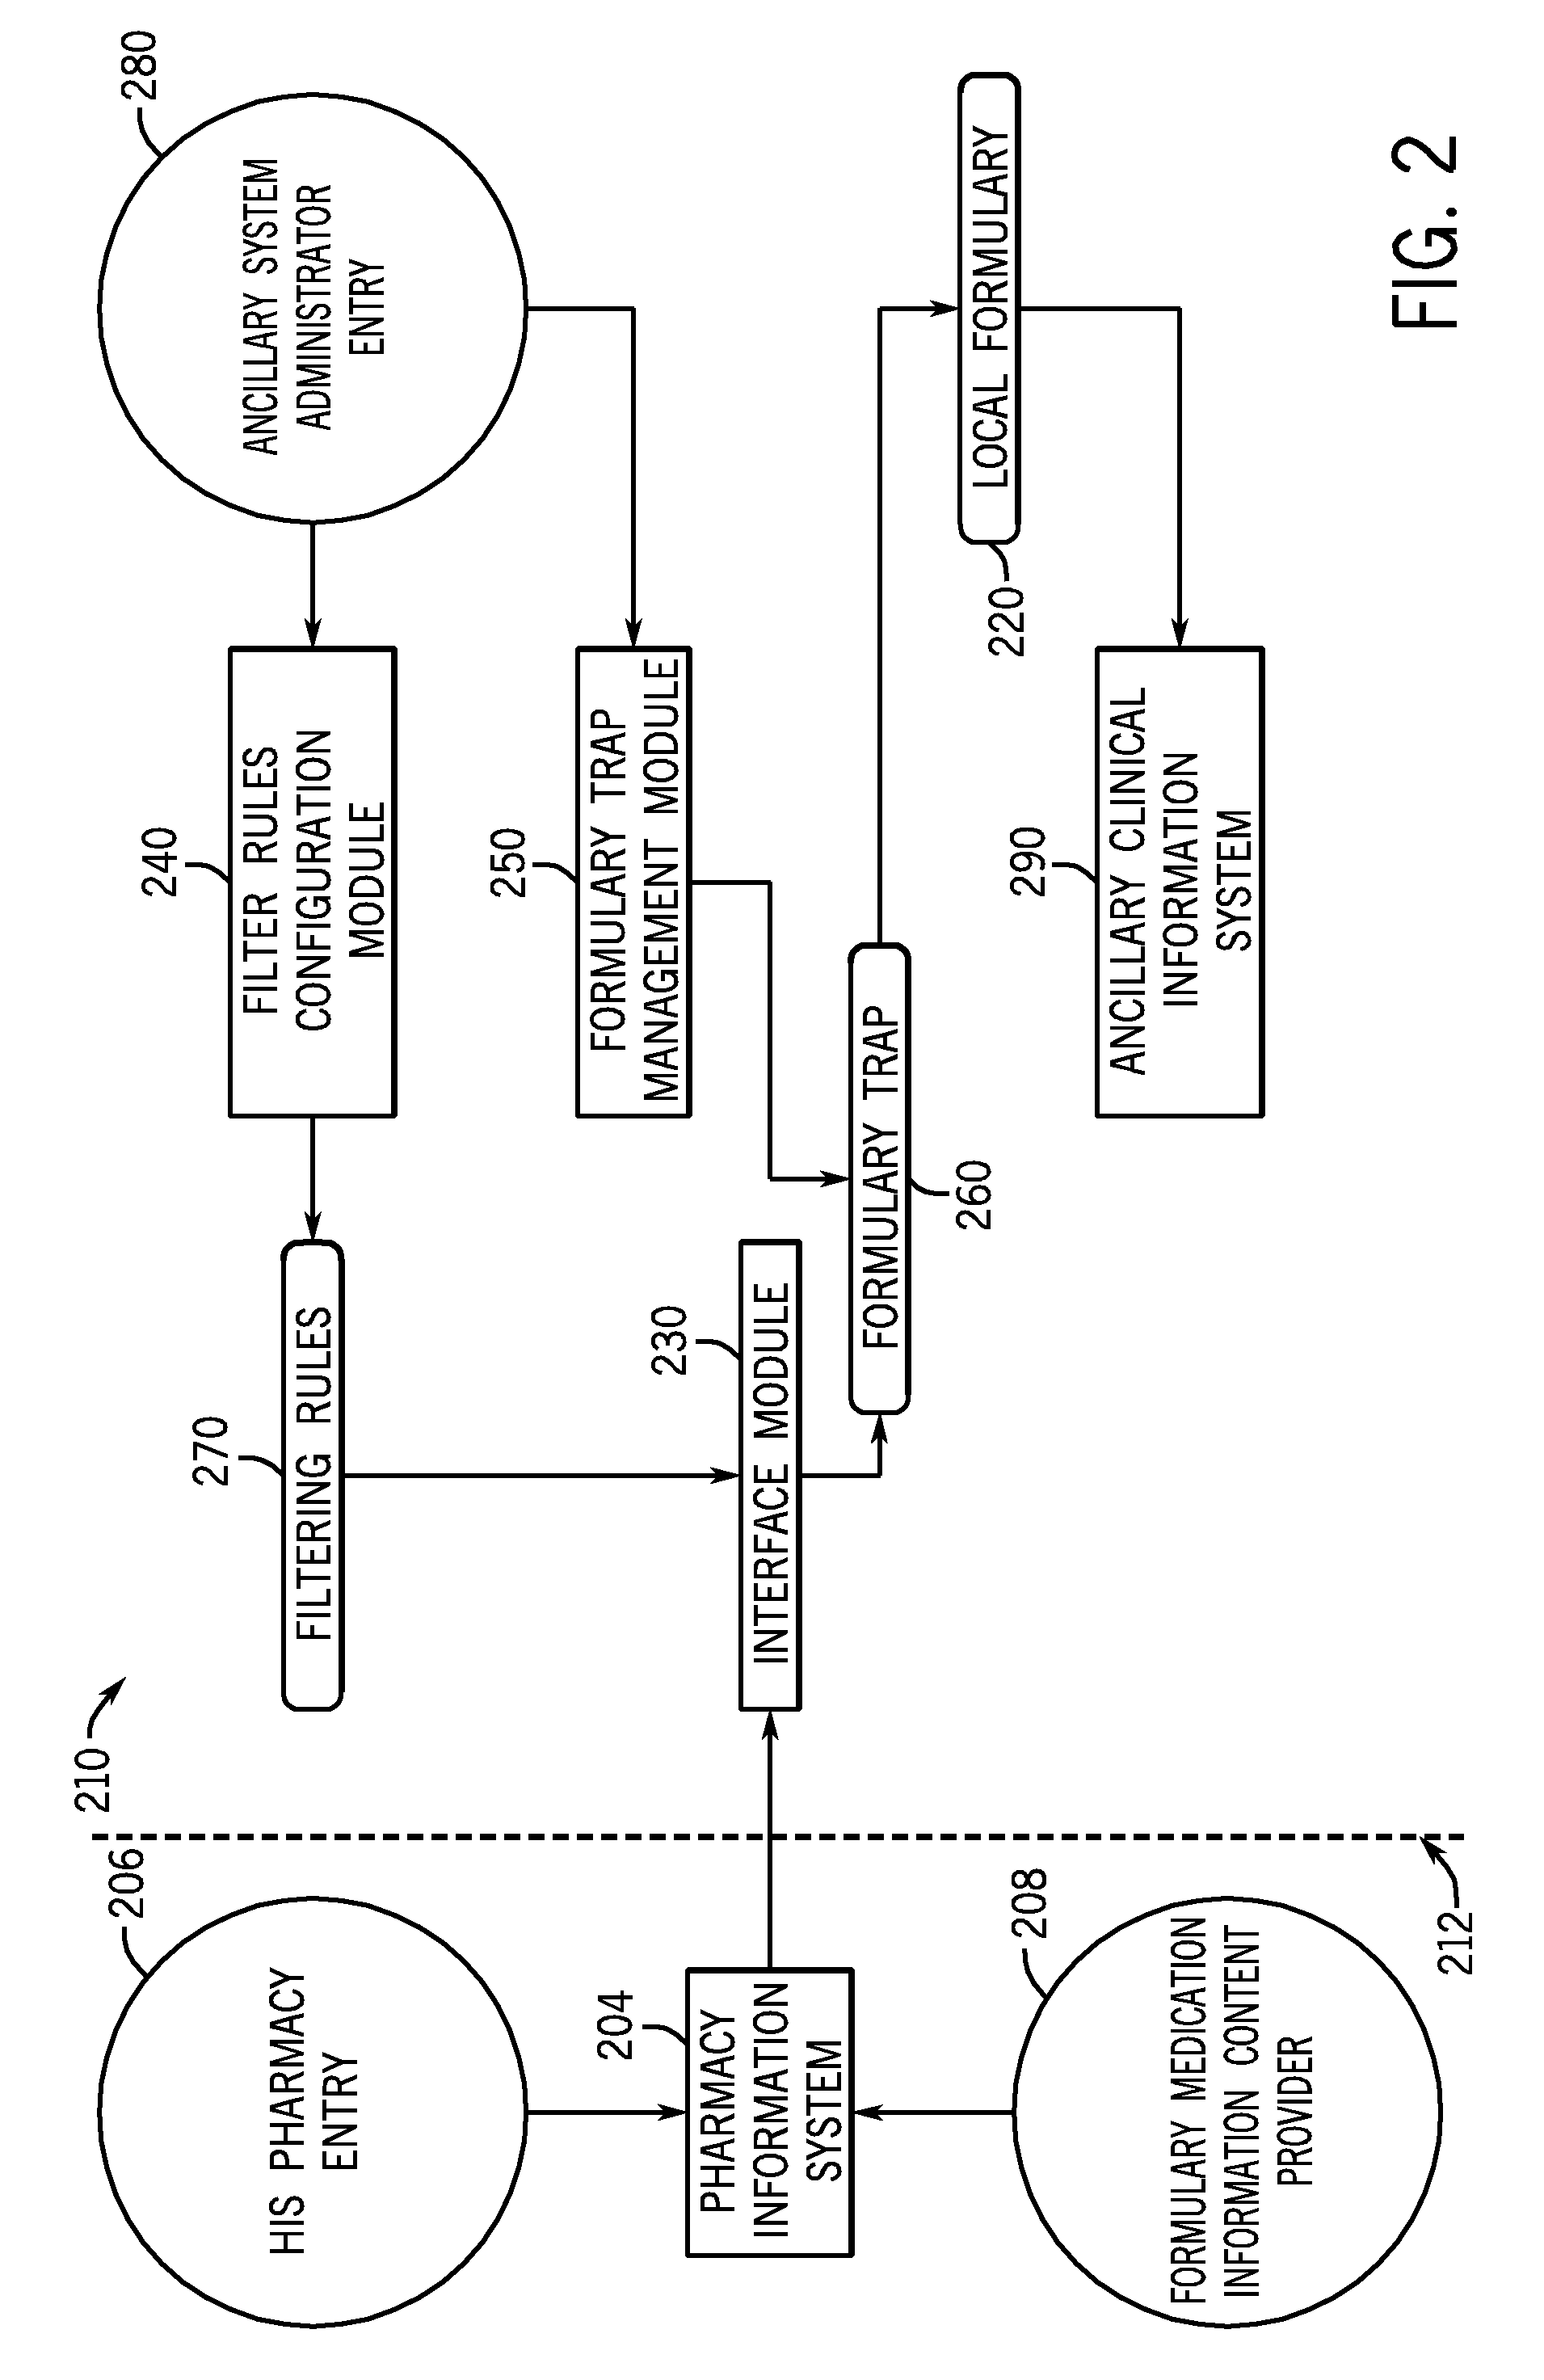 System and method for synchronizing medication configuration information among systems containing medication configuration information